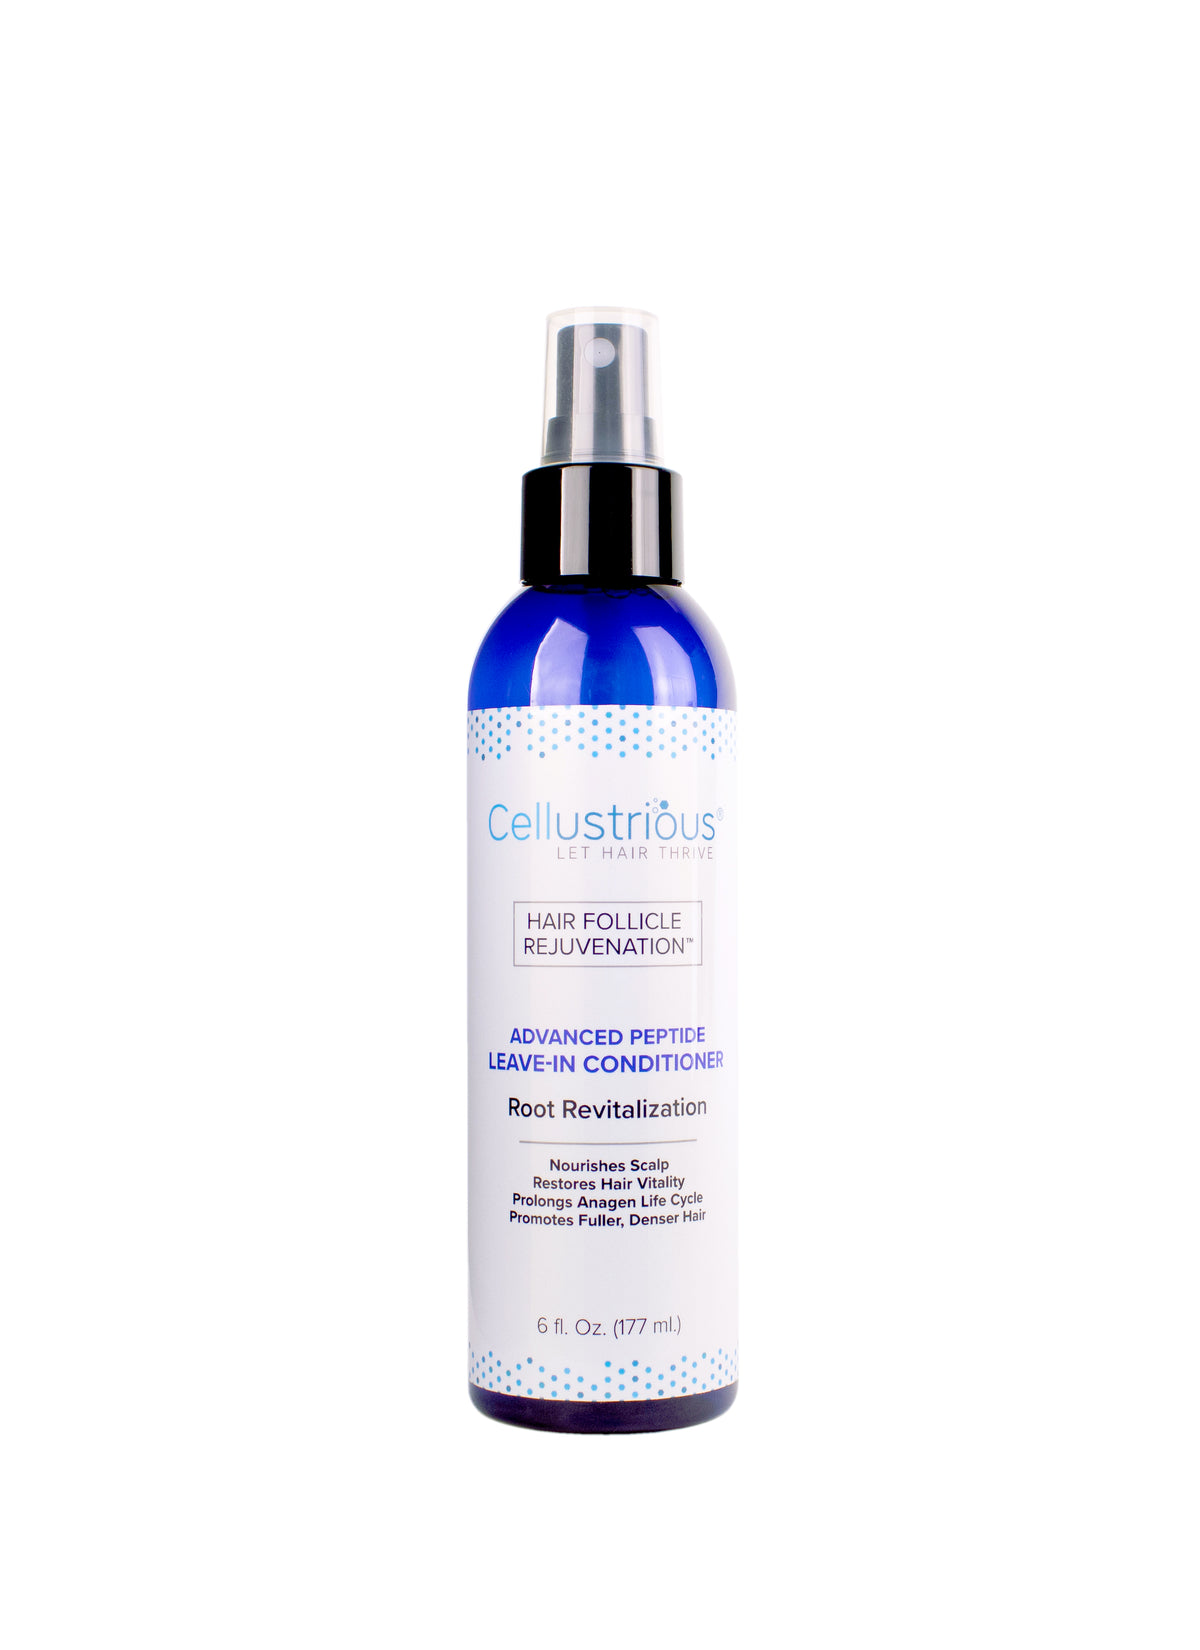 Cellustrious Advanced Peptide Leave-in Conditioner front